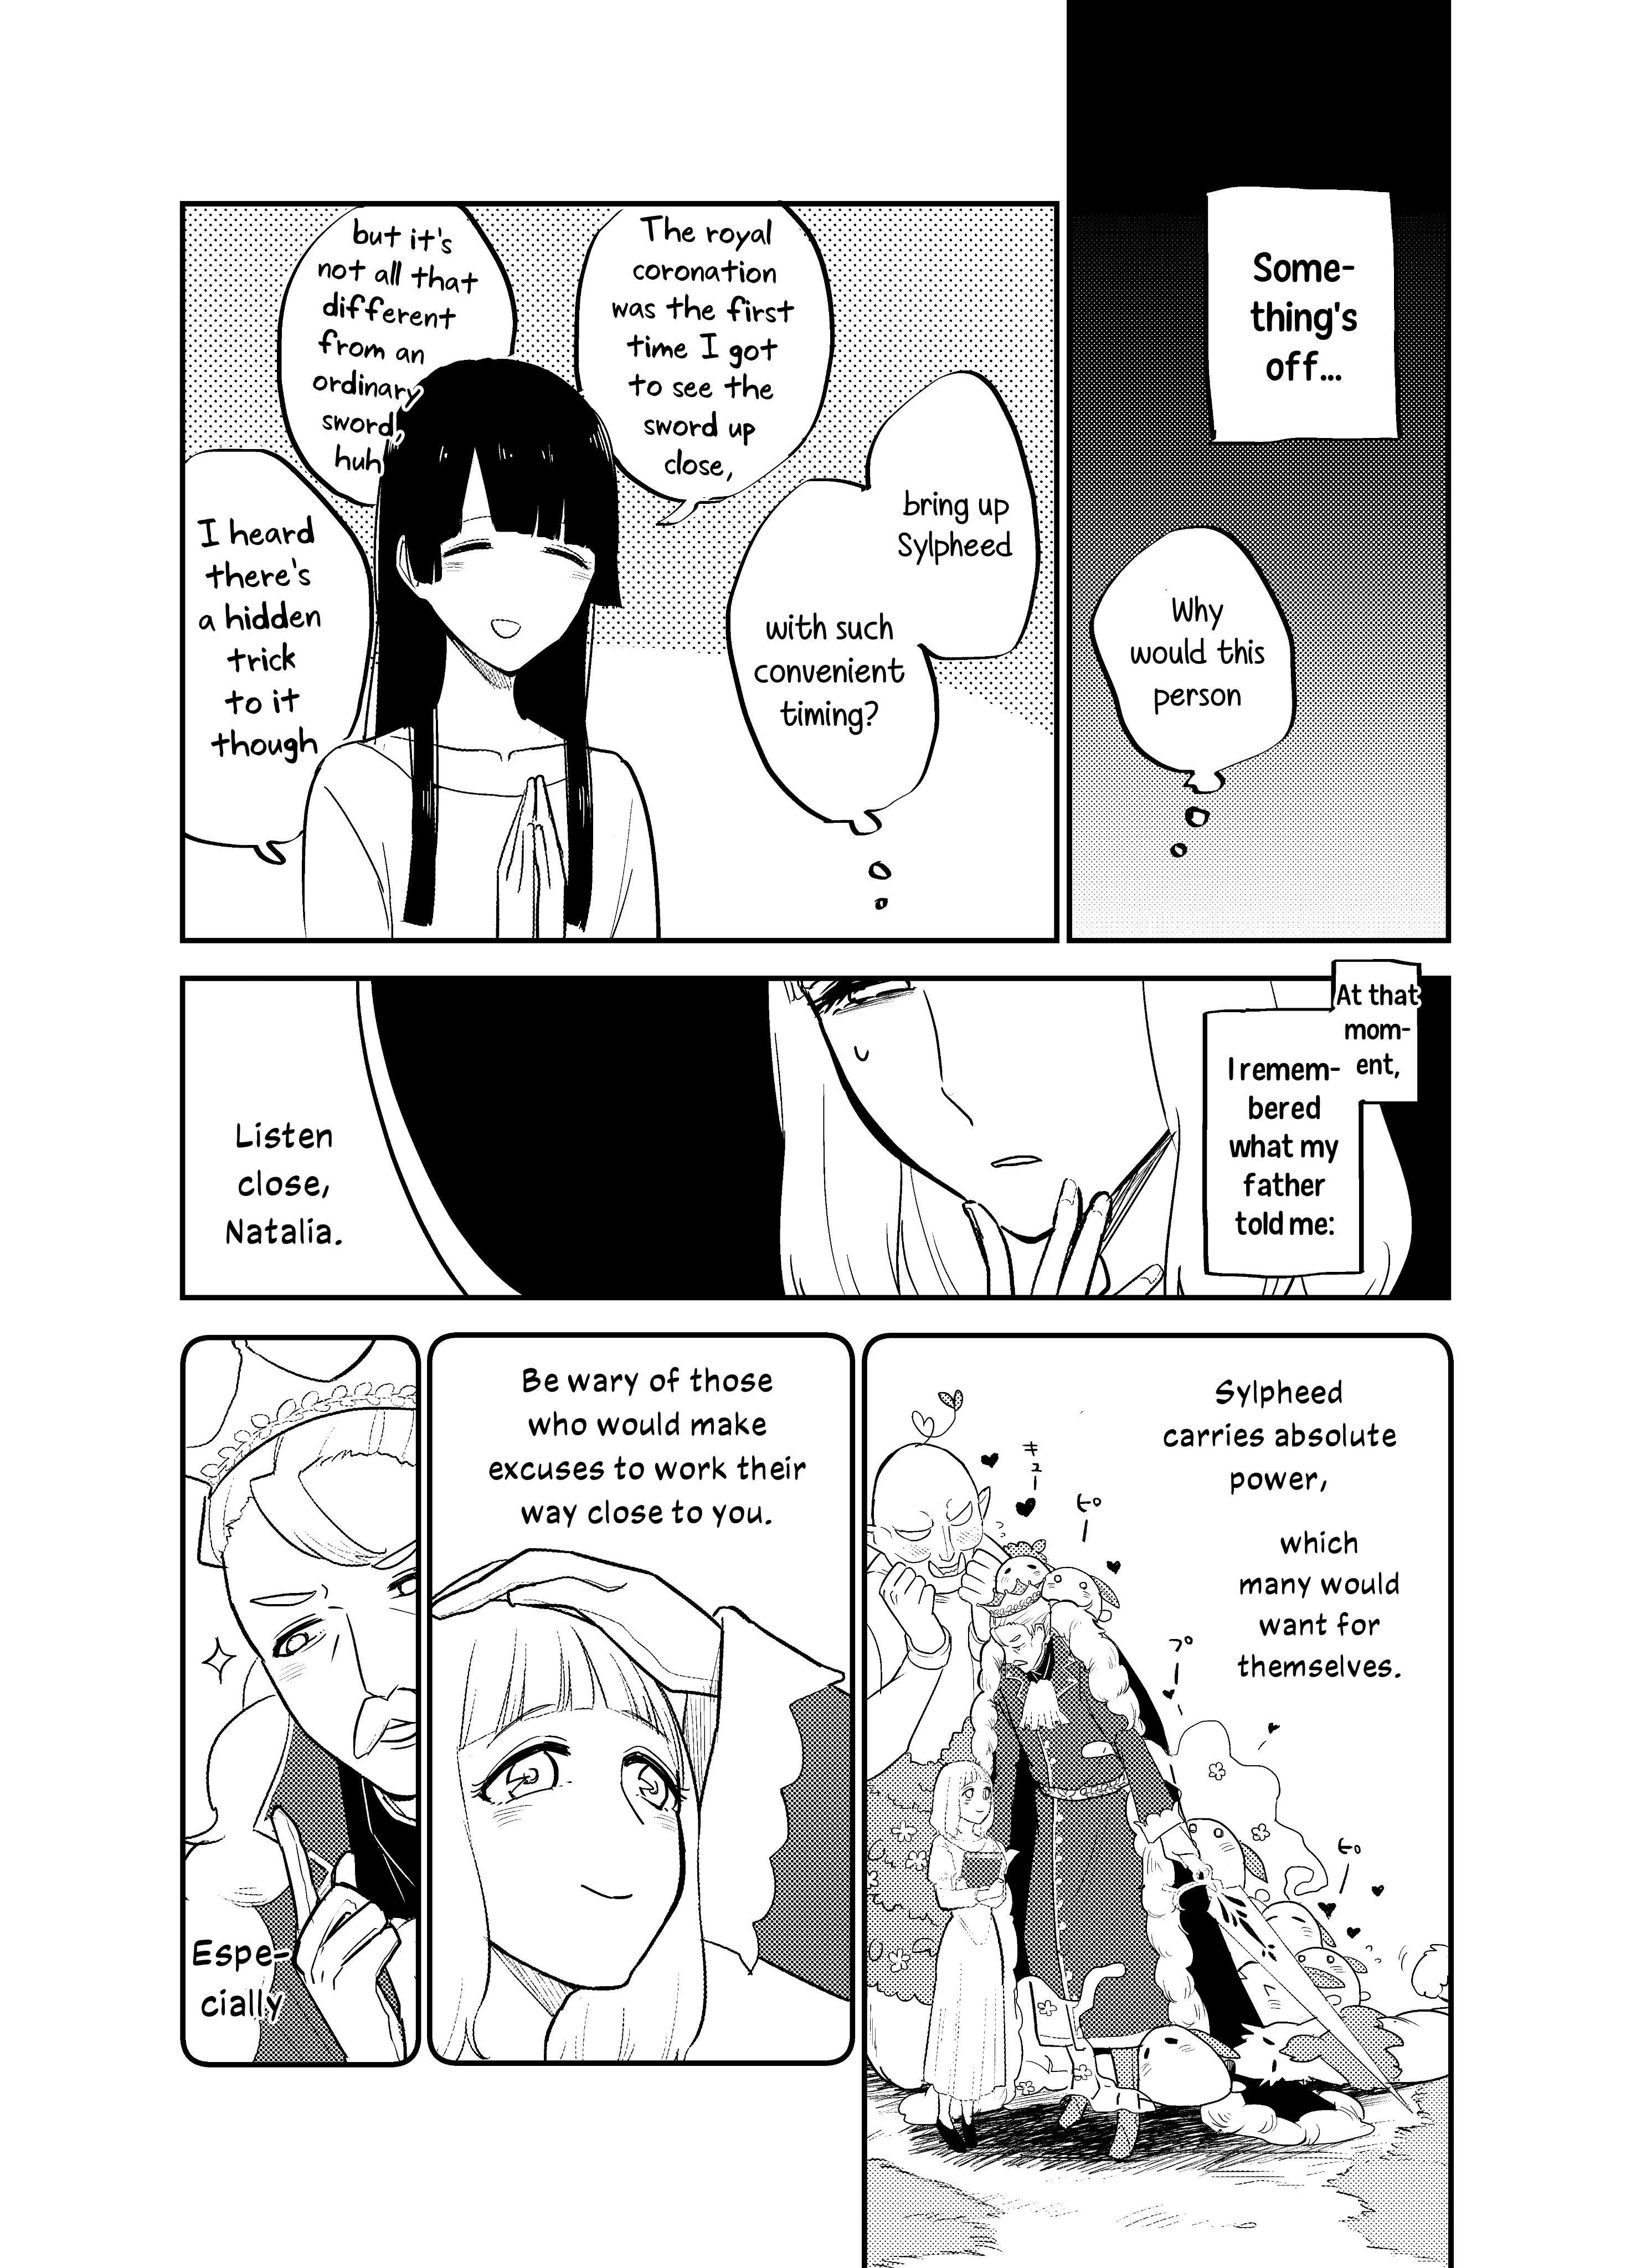 The Princess Of Sylph (Twitter Version) - Page 2